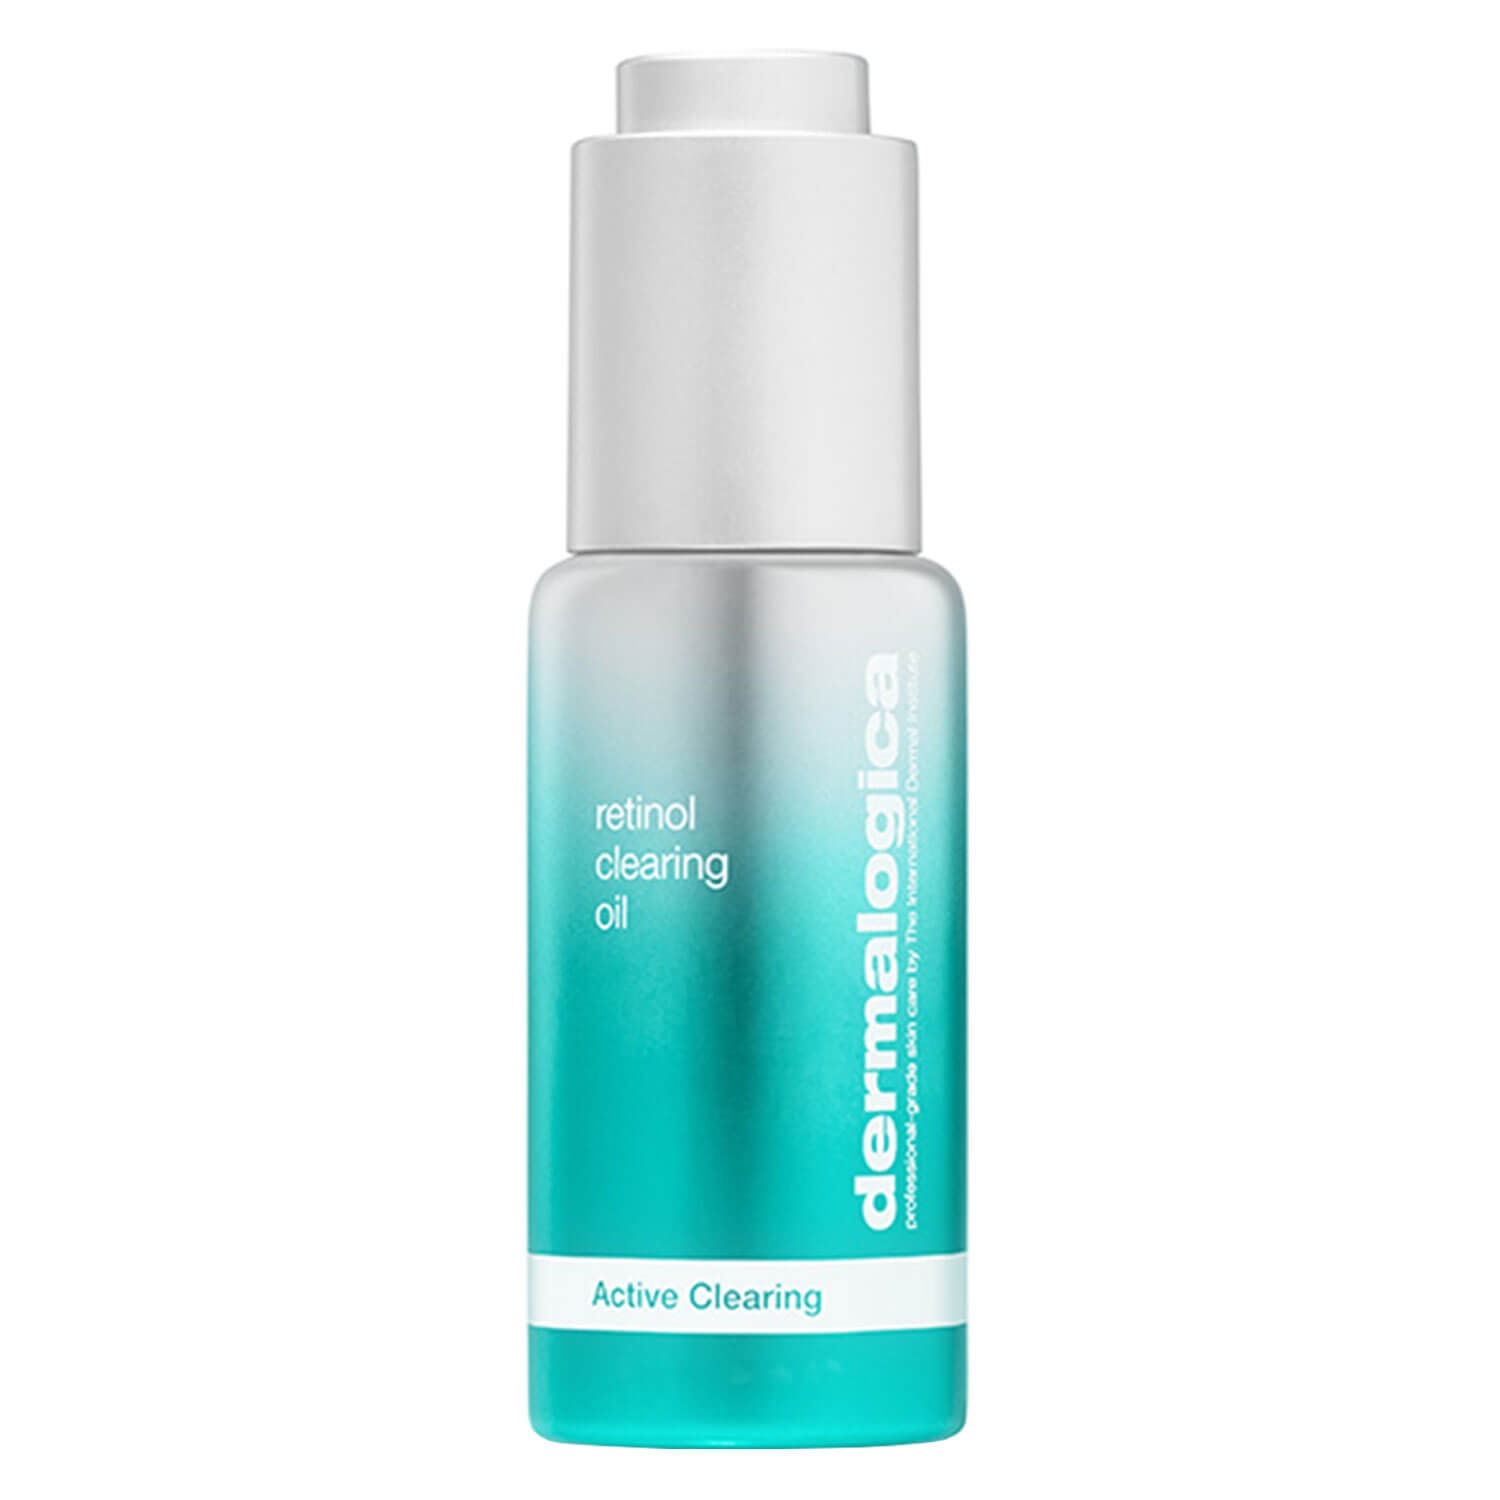 Product image from Active Clearing - Retinol Clearing Oil